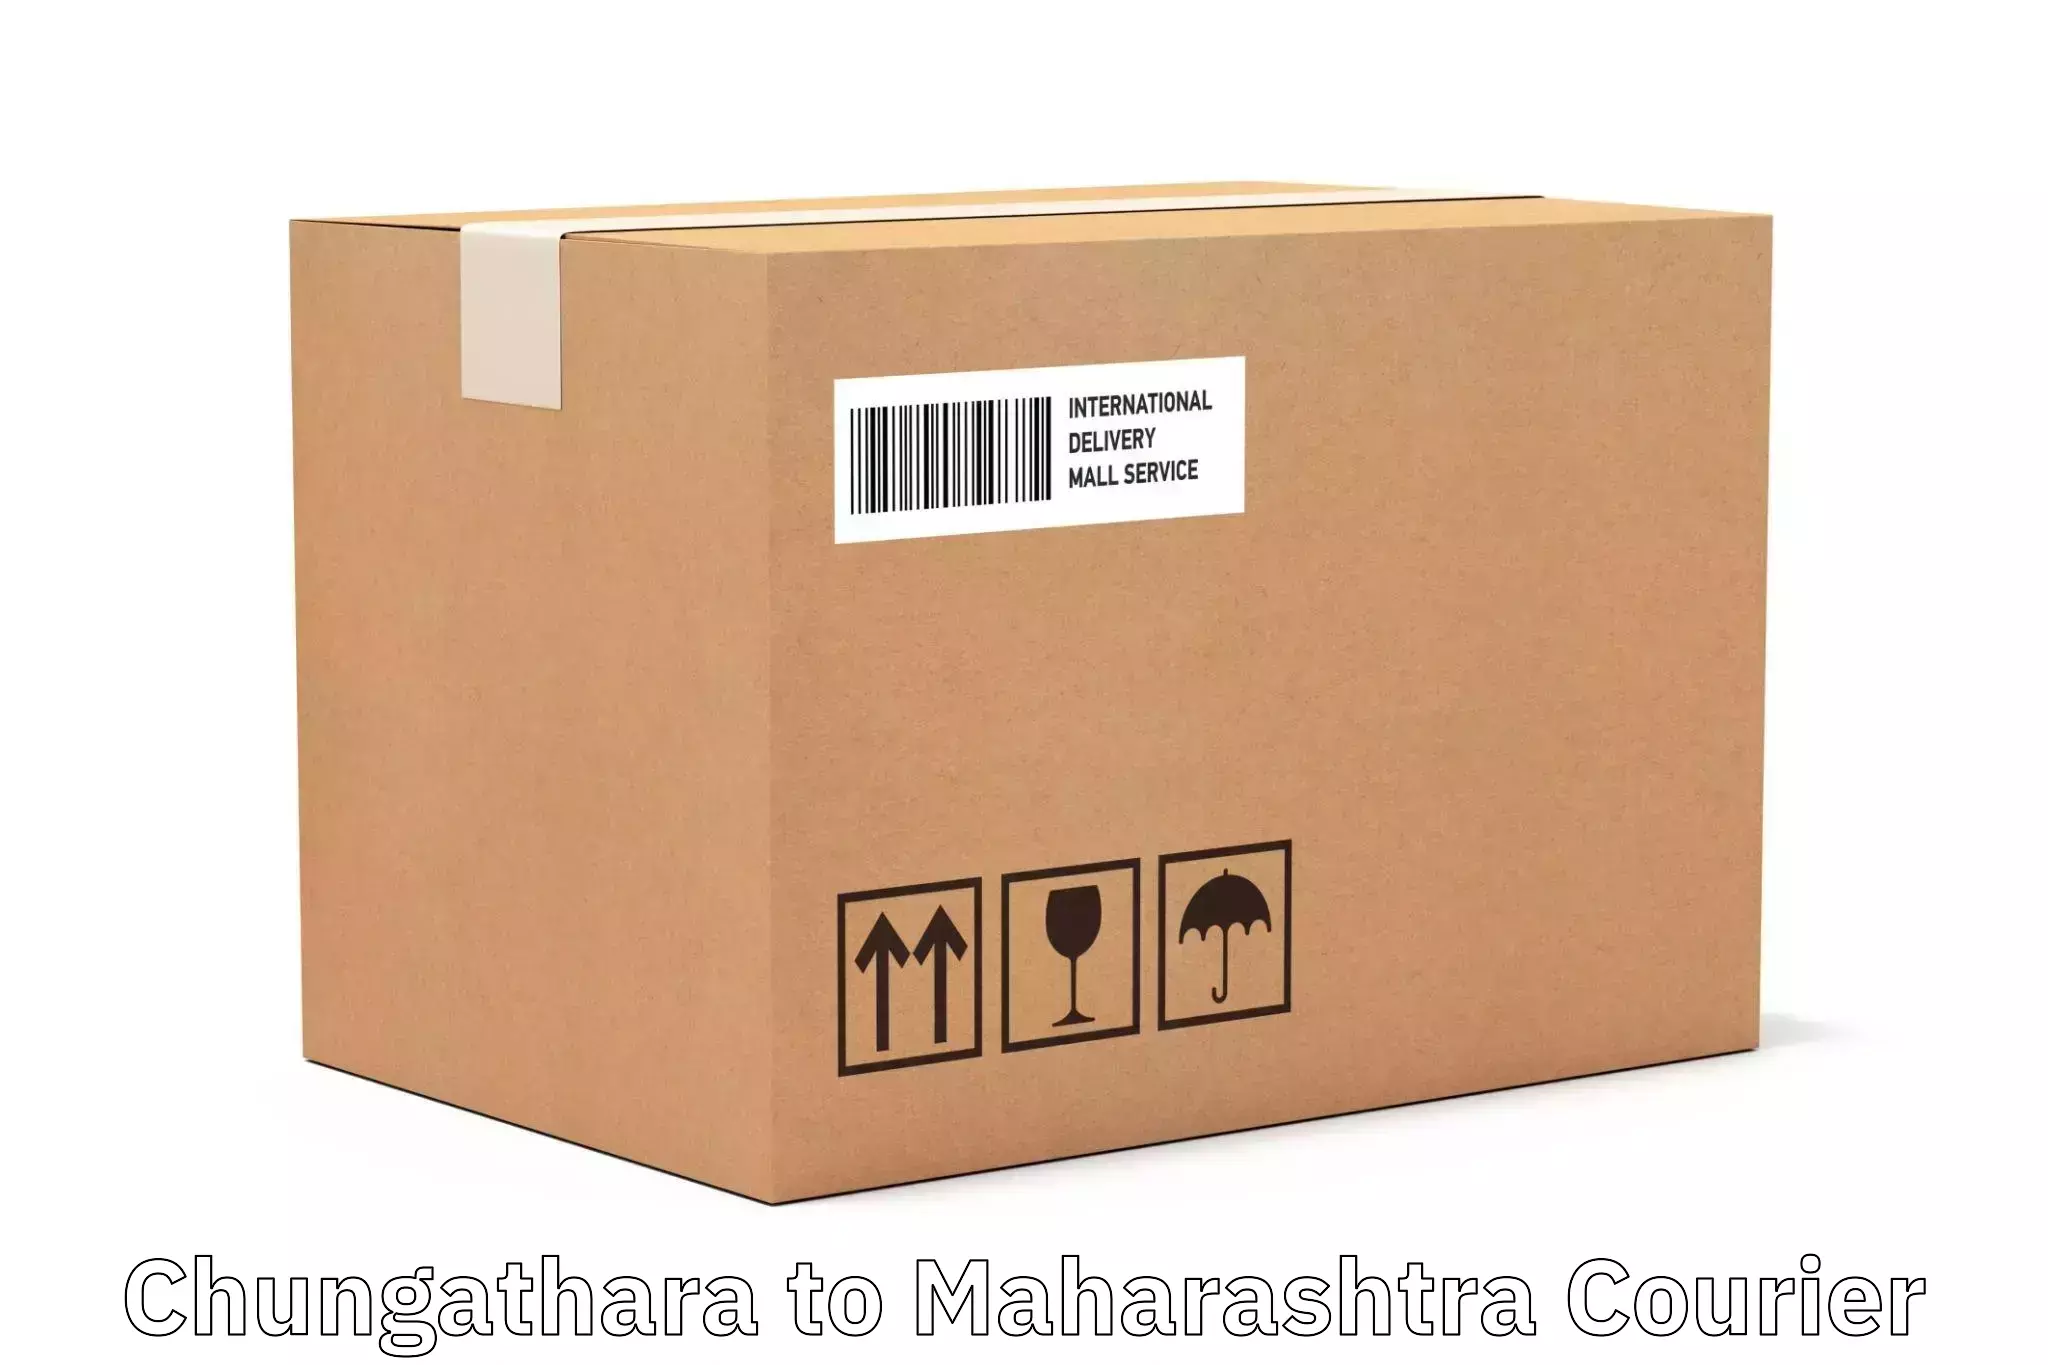 Express delivery solutions in Chungathara to Yeola